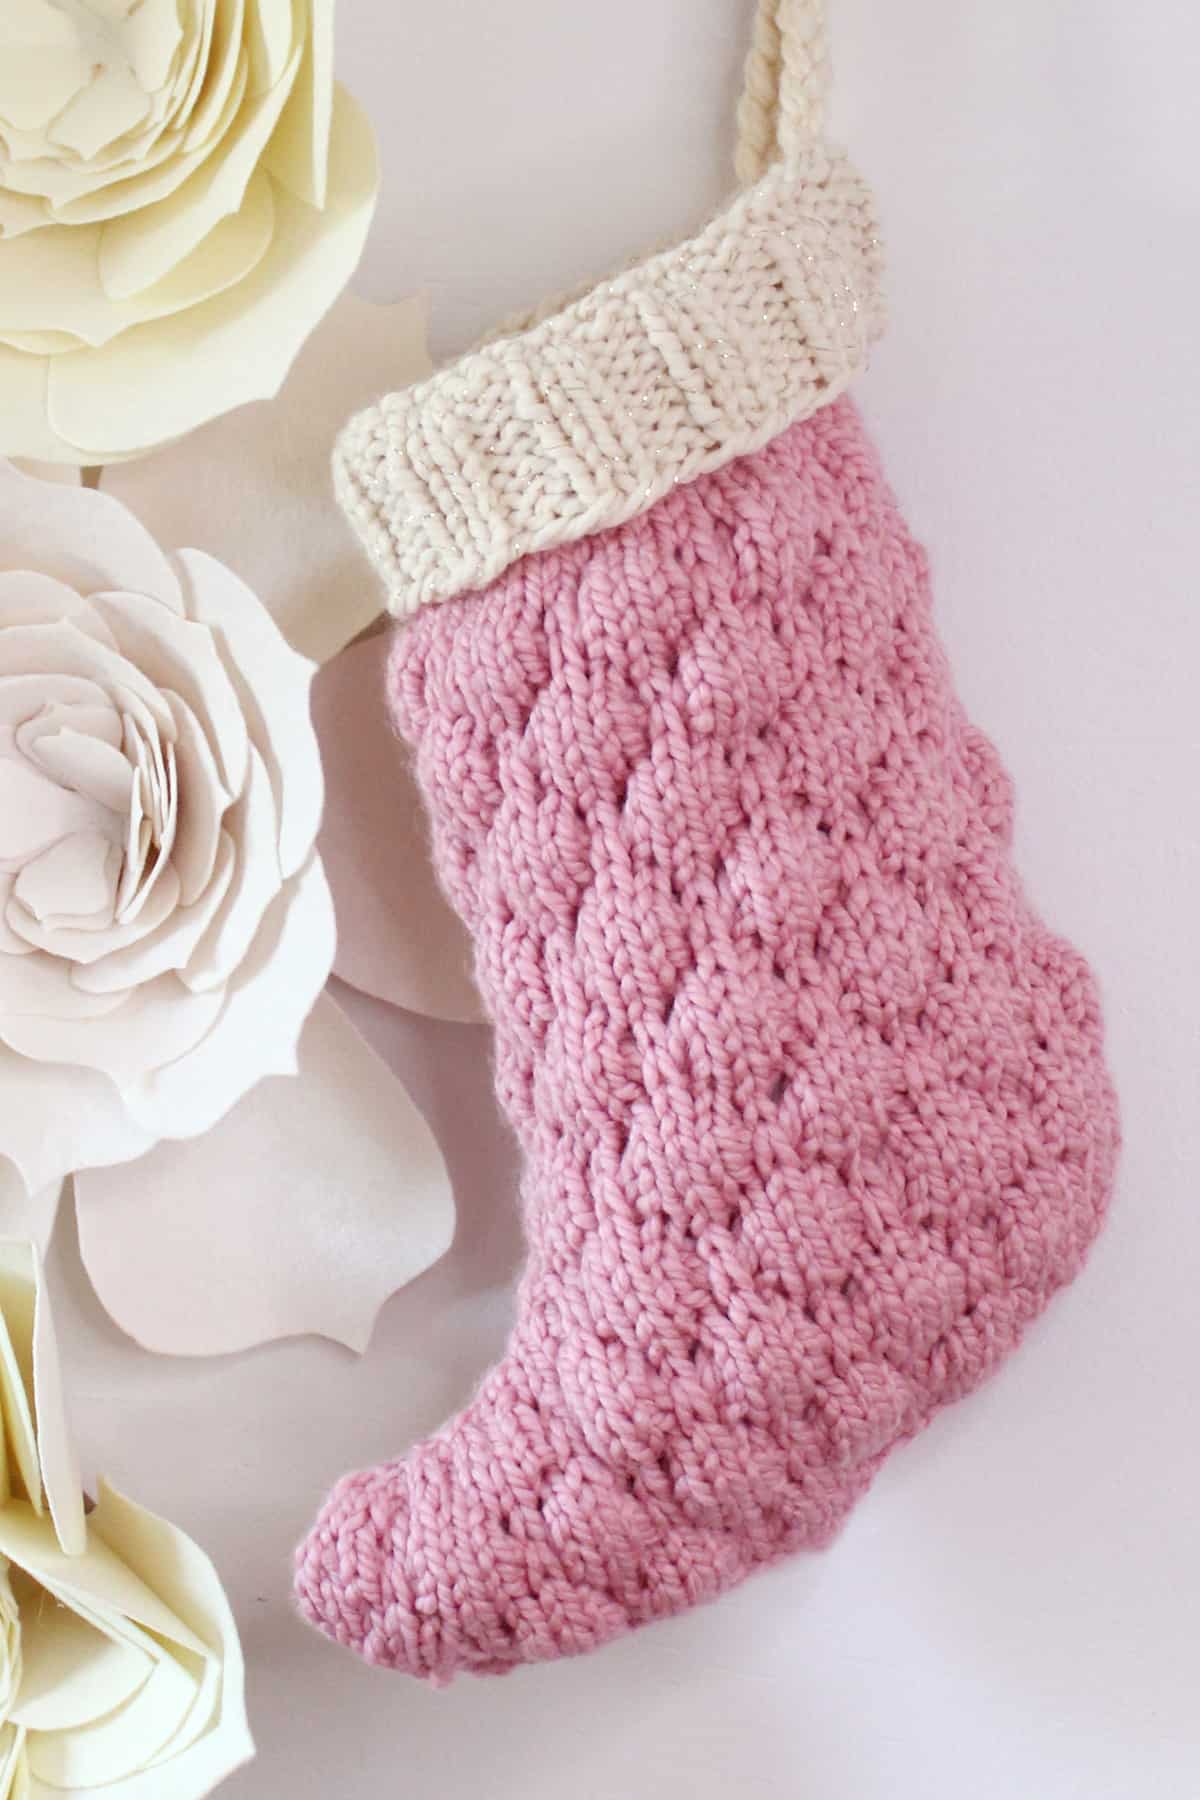 Knitted Bubble Stocking in pink color yarn and a cream color cuff on a wall with felt flowers.